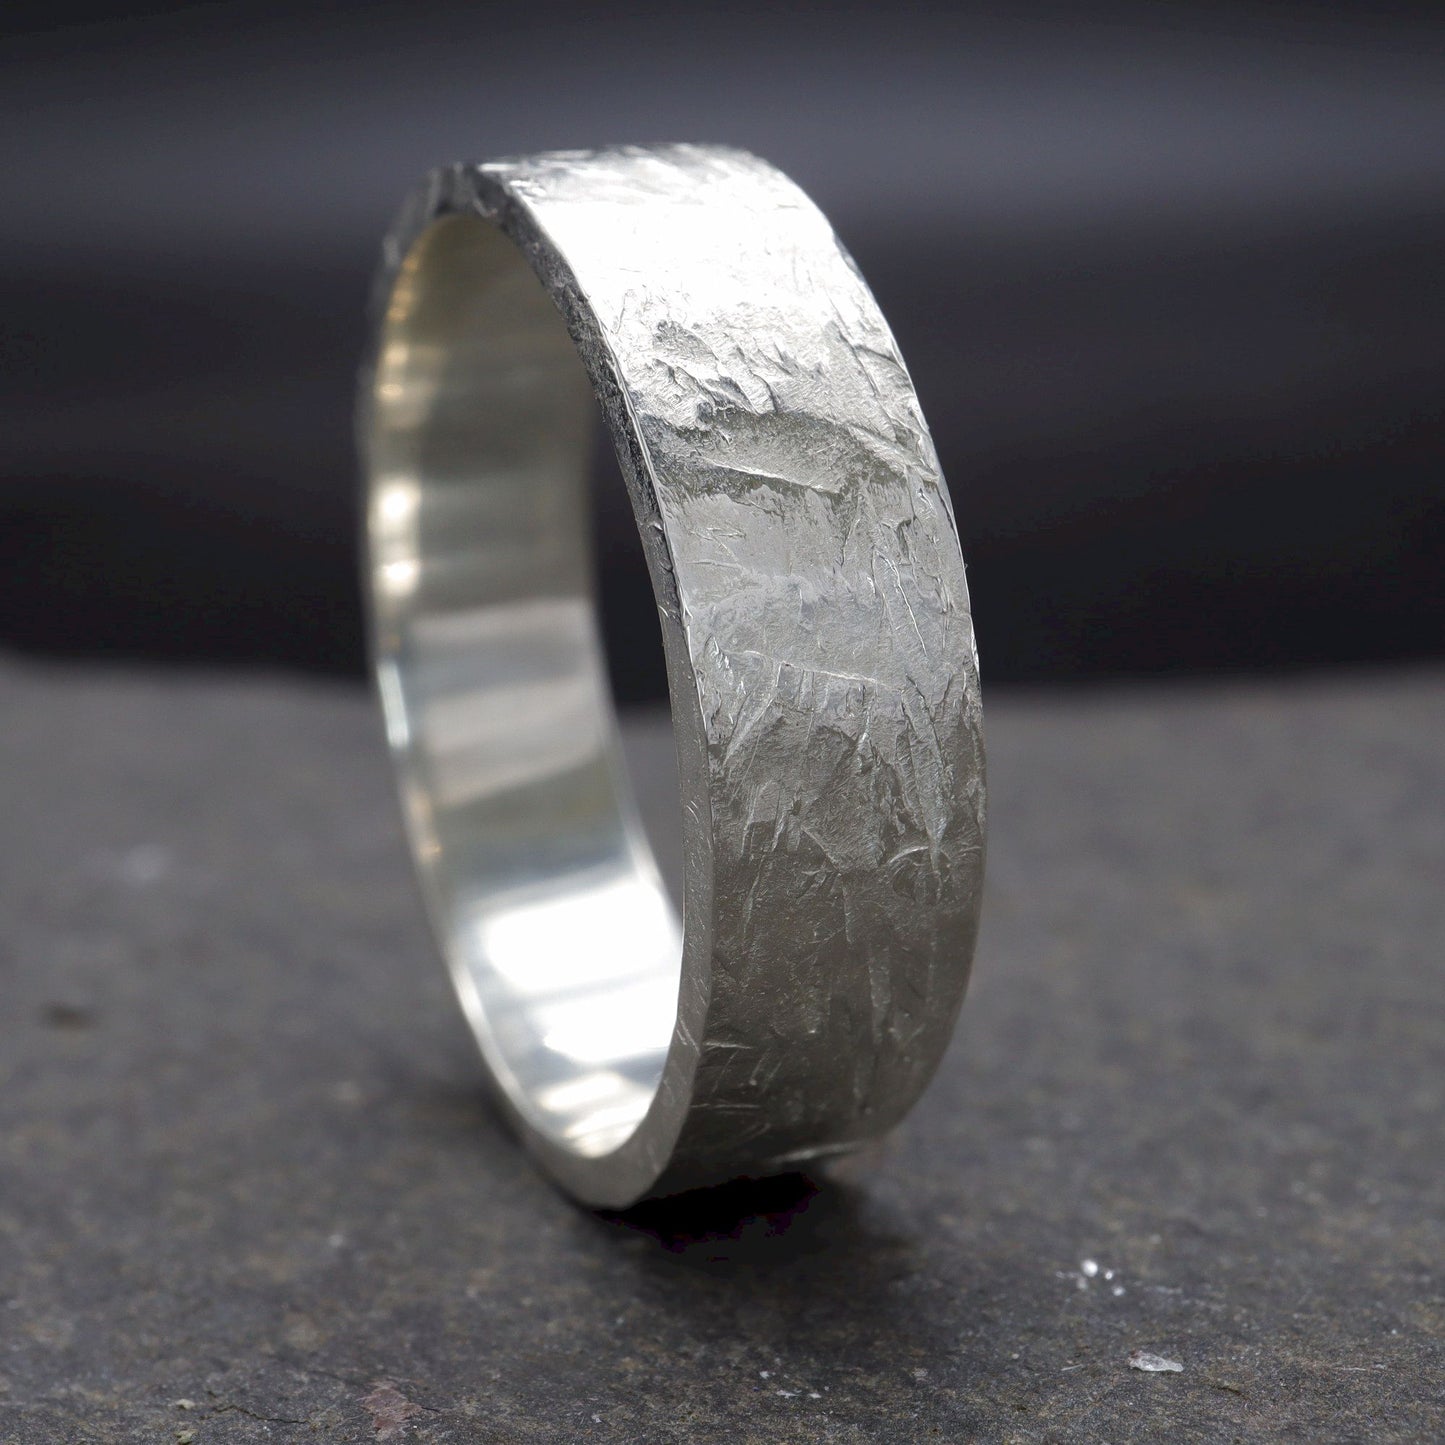 White gold broad wedding ring - rustic flat hammered textured band - Windermere design.